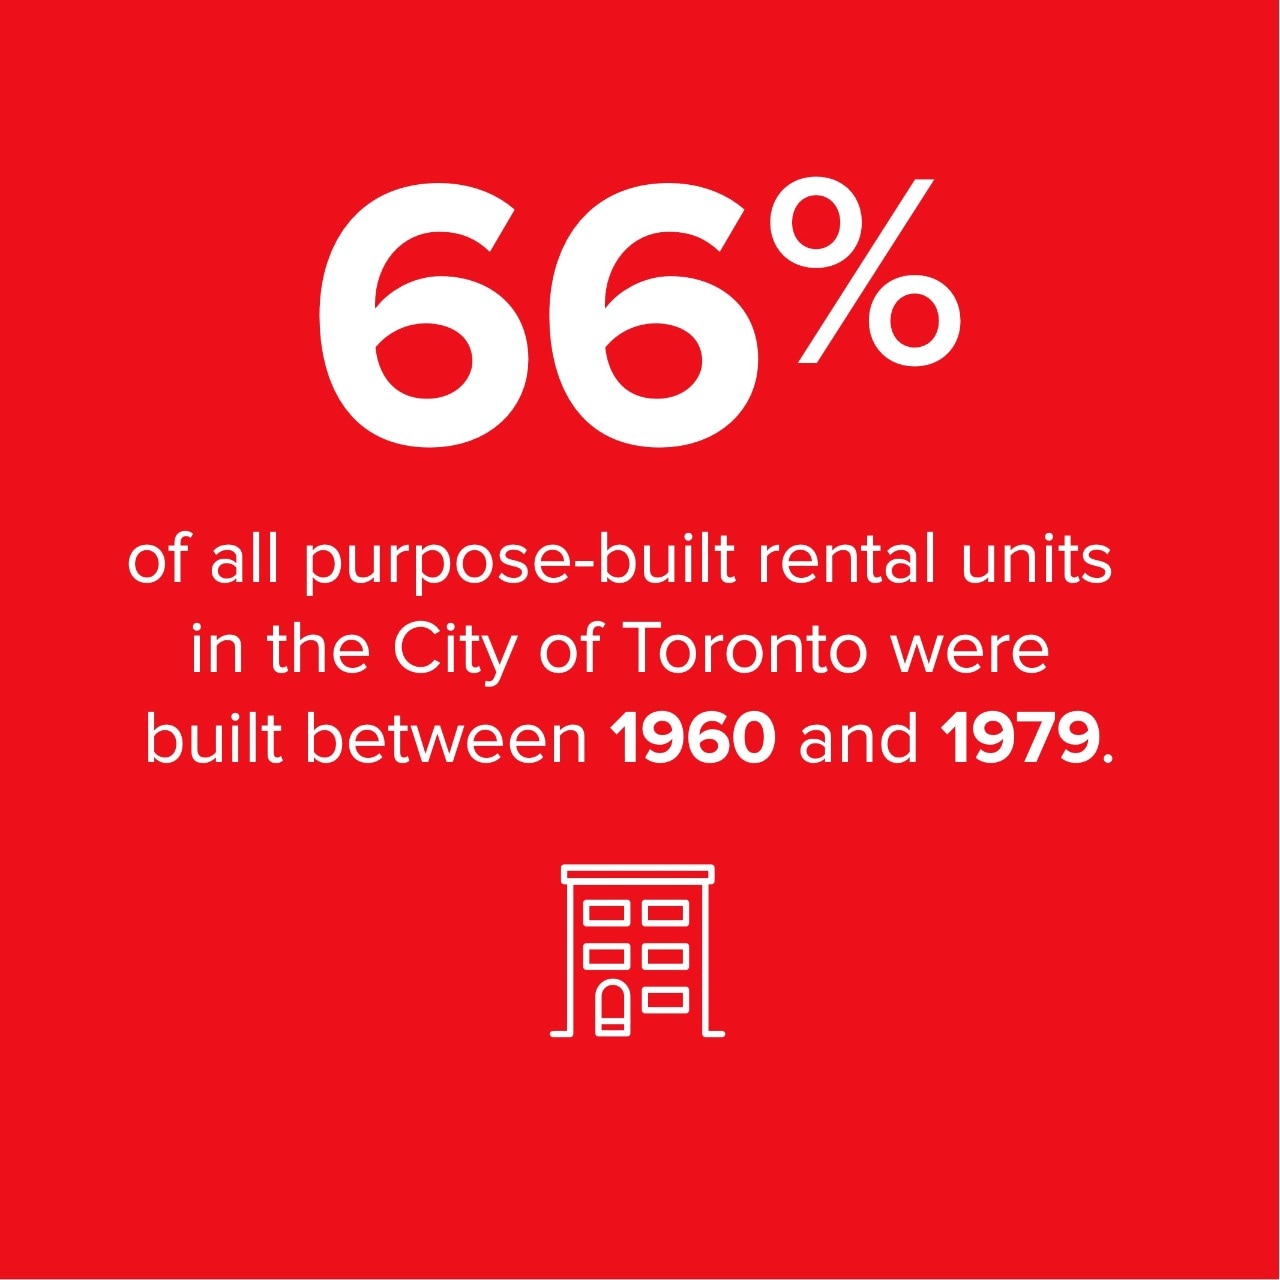 66% of all purpose-built rental unites in the City of Toronto were built between 1960 and 1979.